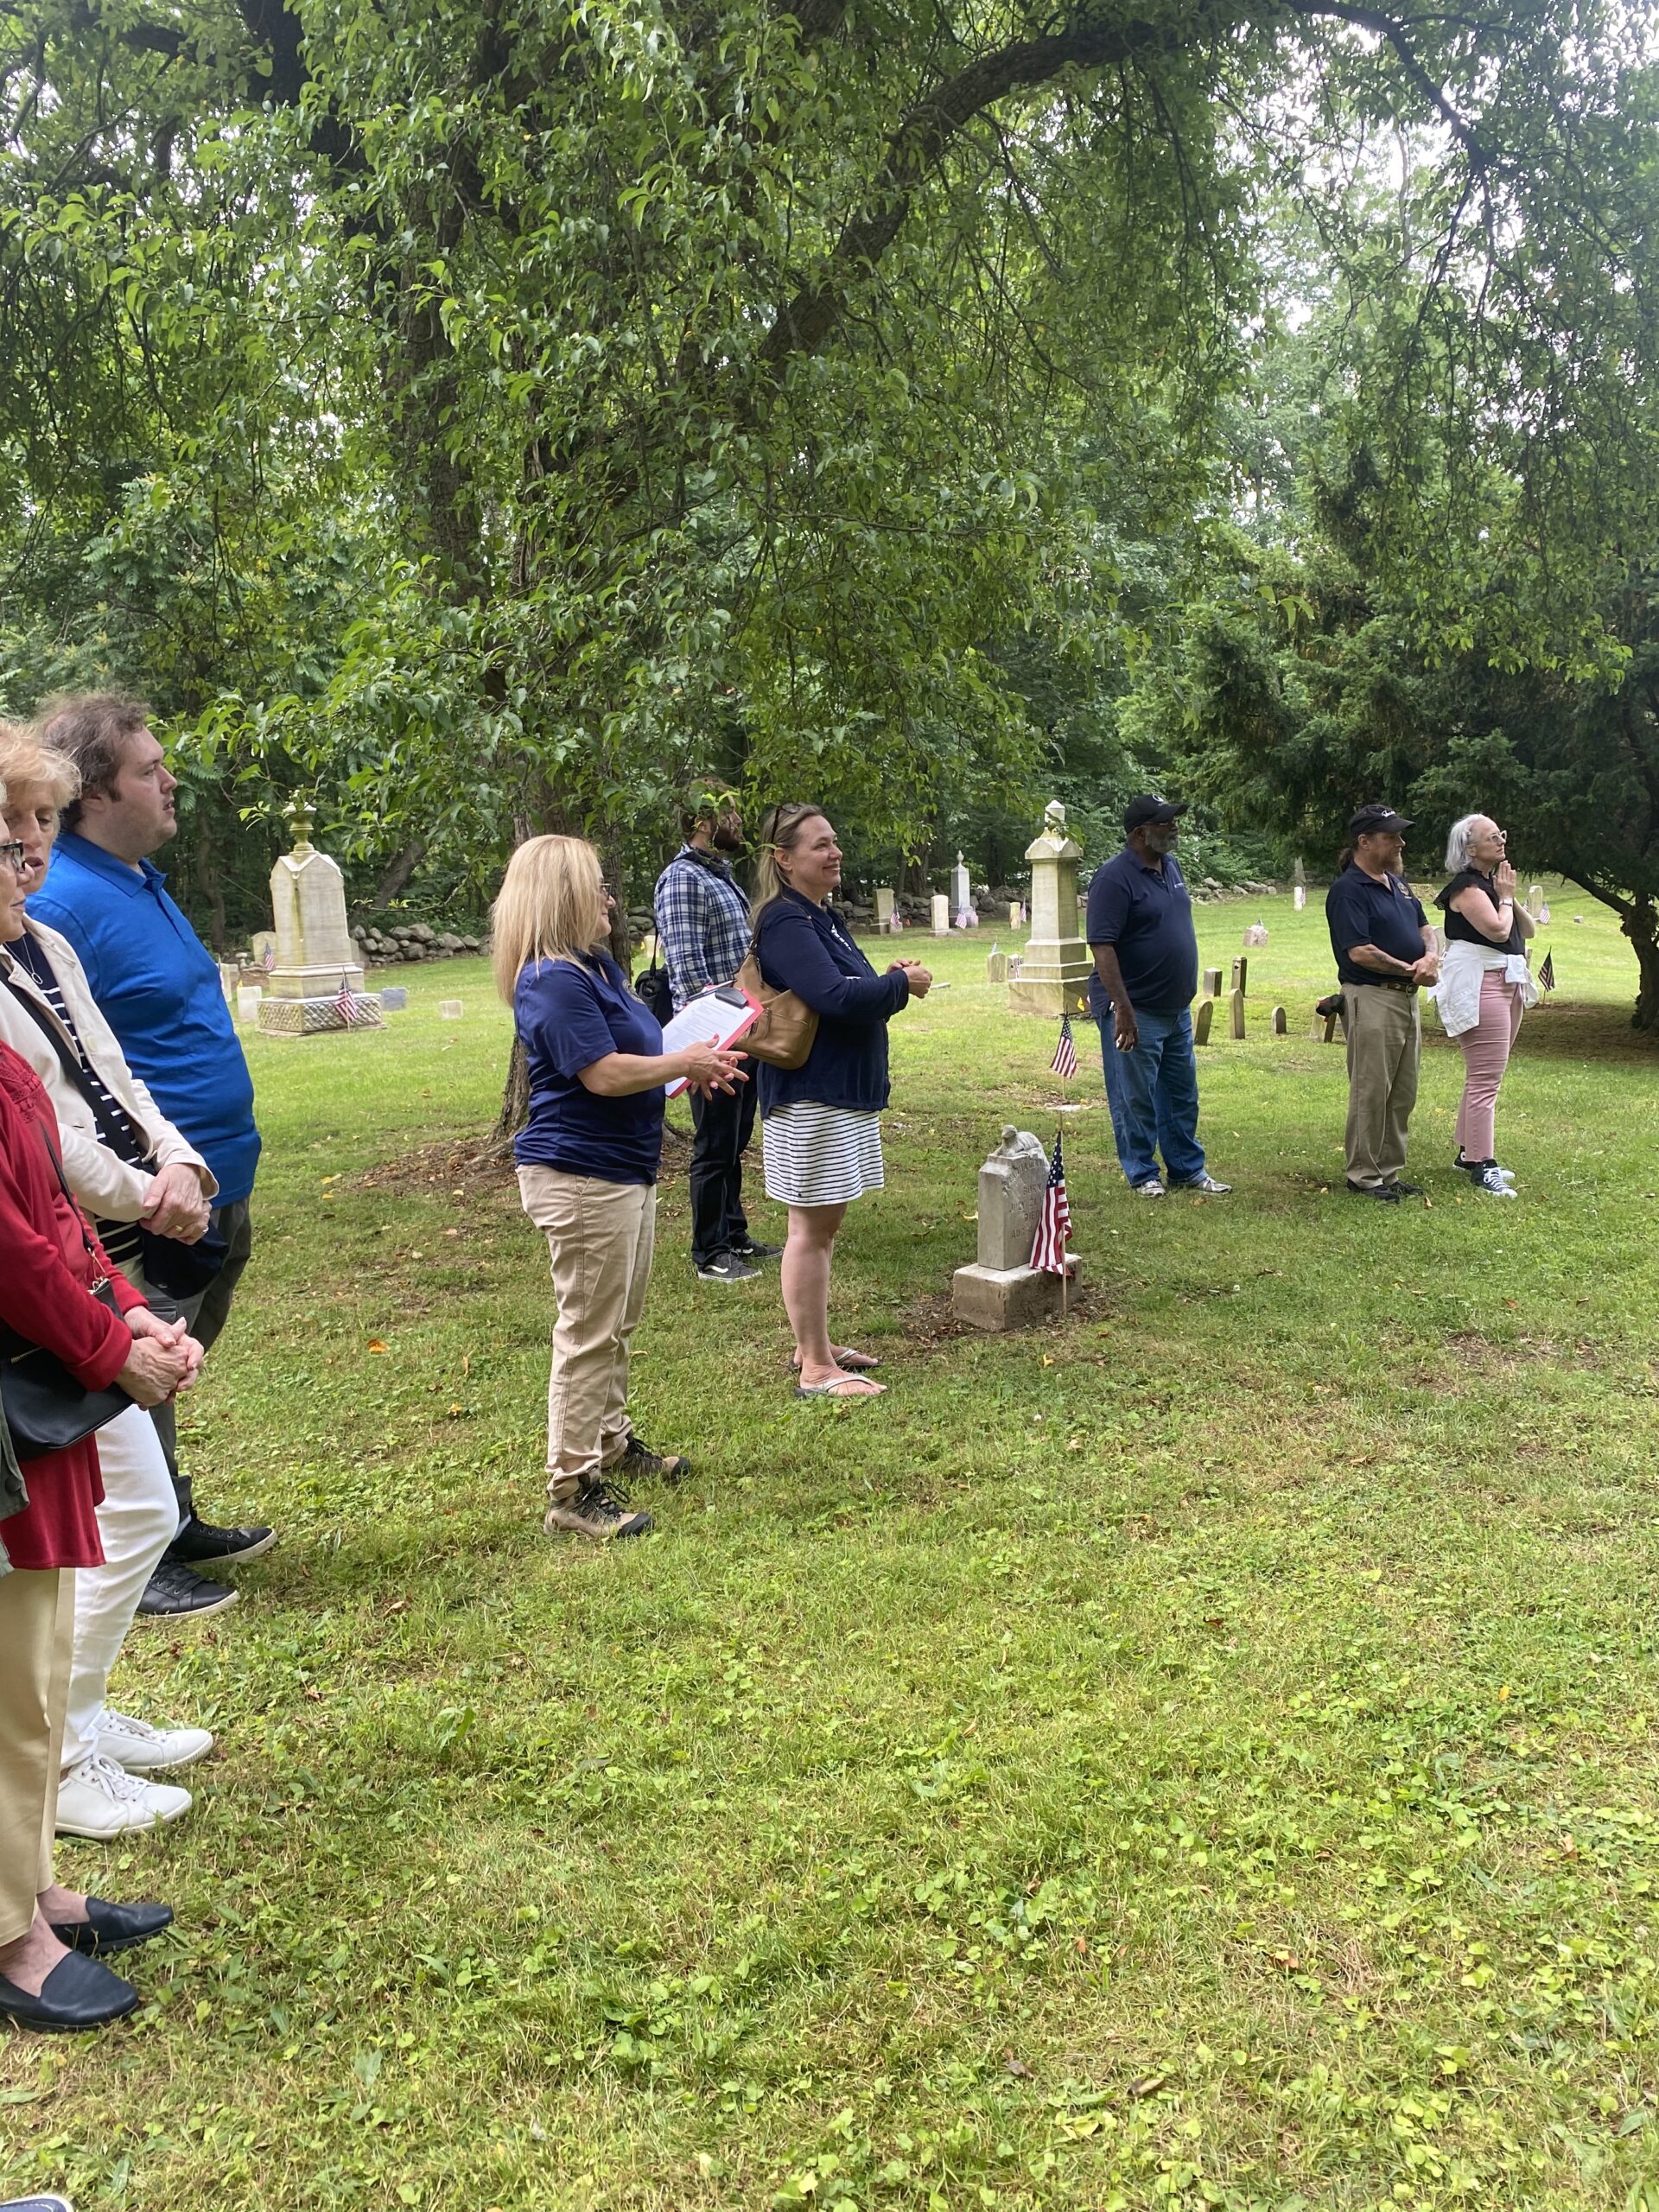 (PHOTO: A Juneteenth celebration was held at the African American Cemetery on June 17.)